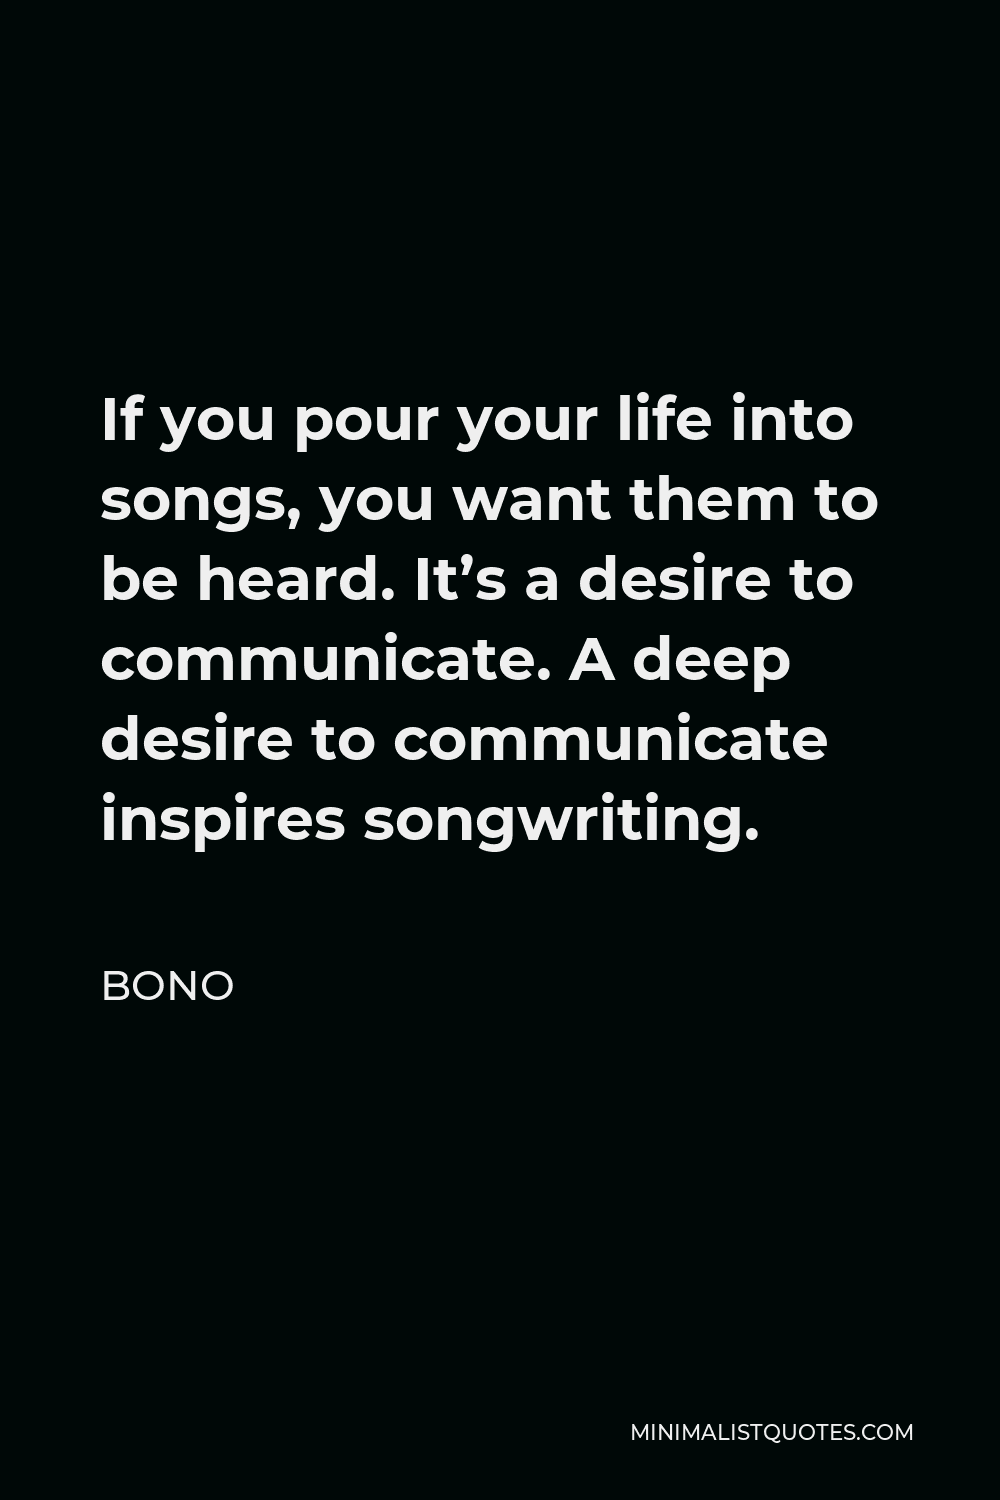 Bono Quote - If you pour your life into songs, you want them to be heard. It’s a desire to communicate. A deep desire to communicate inspires songwriting.